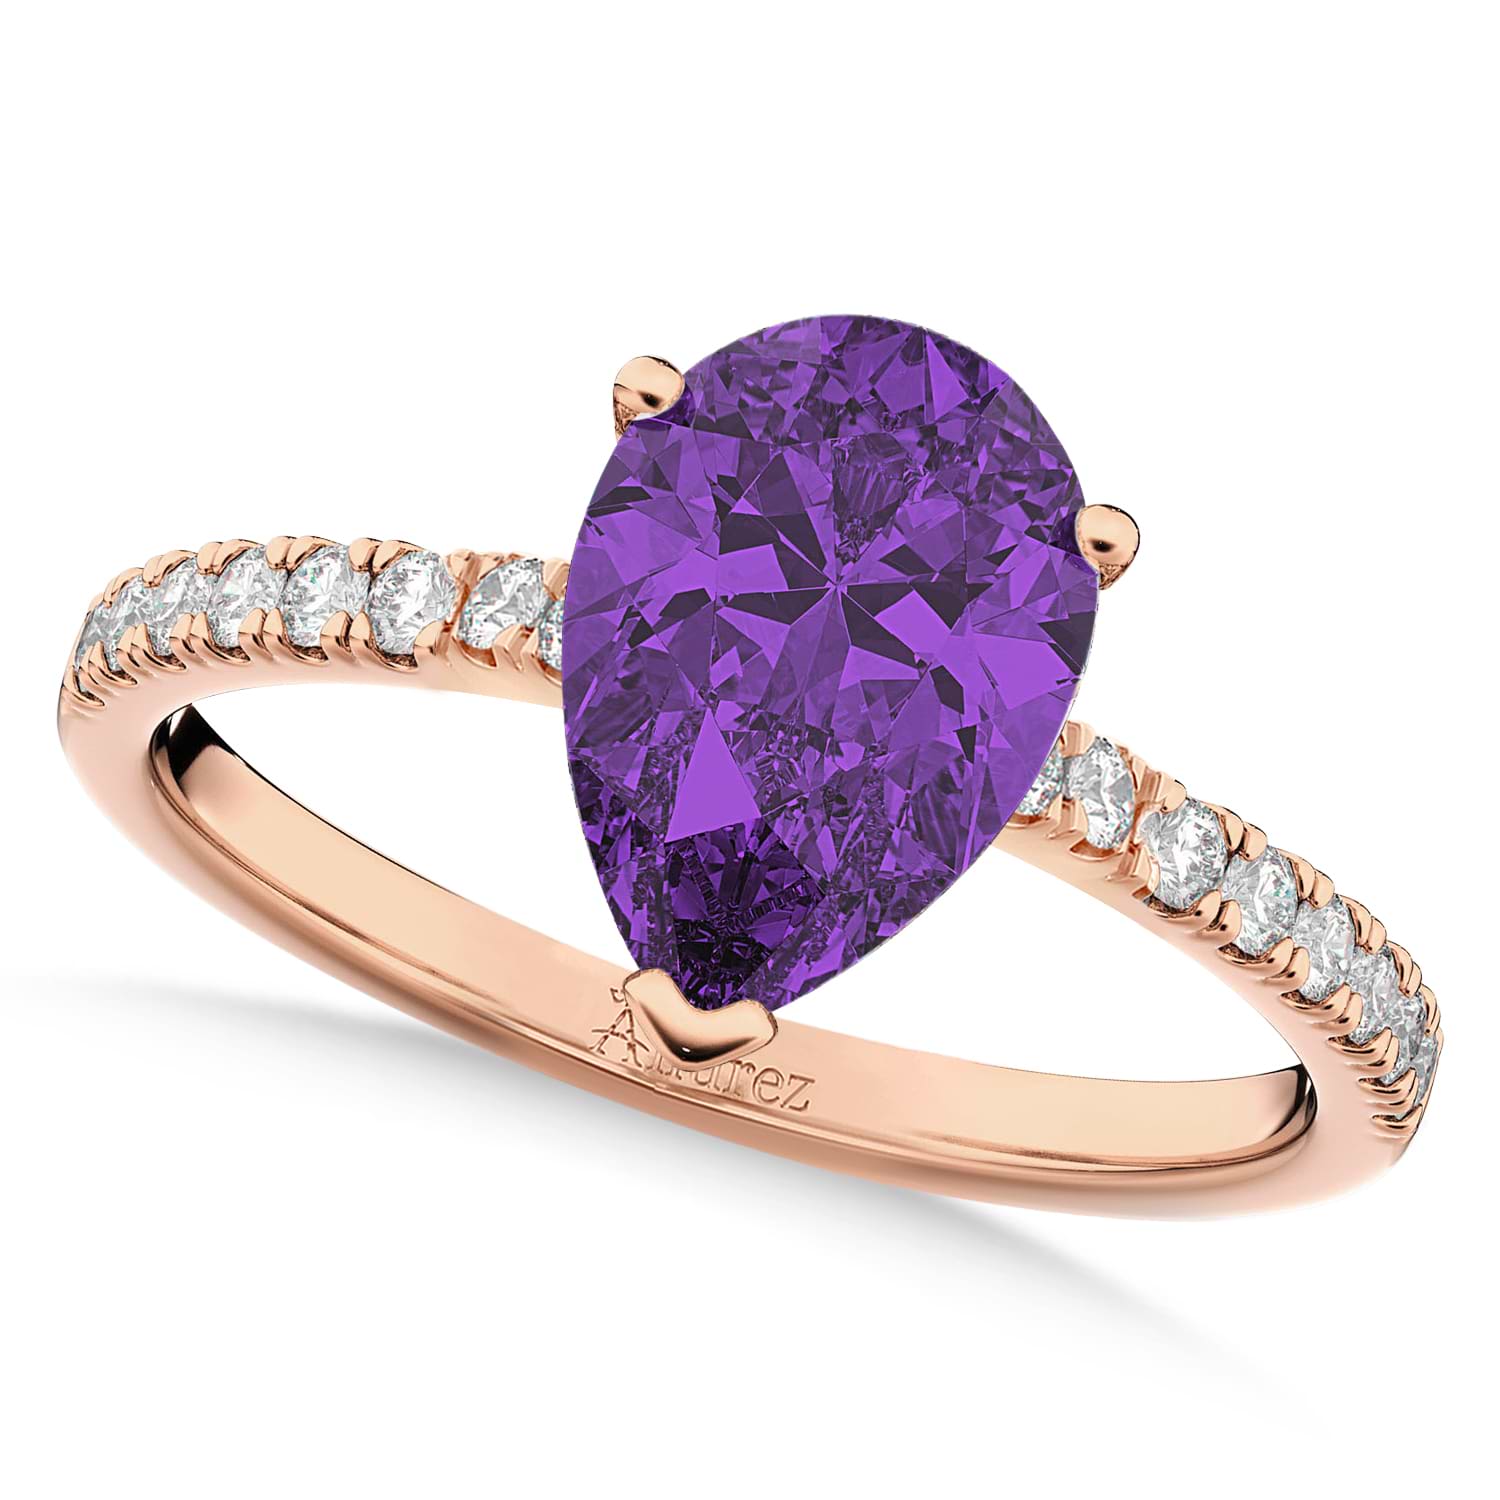 Pear Cut Sidestone Accented Amethyst & Diamond Engagement Ring 14K Rose Gold 1.91ct